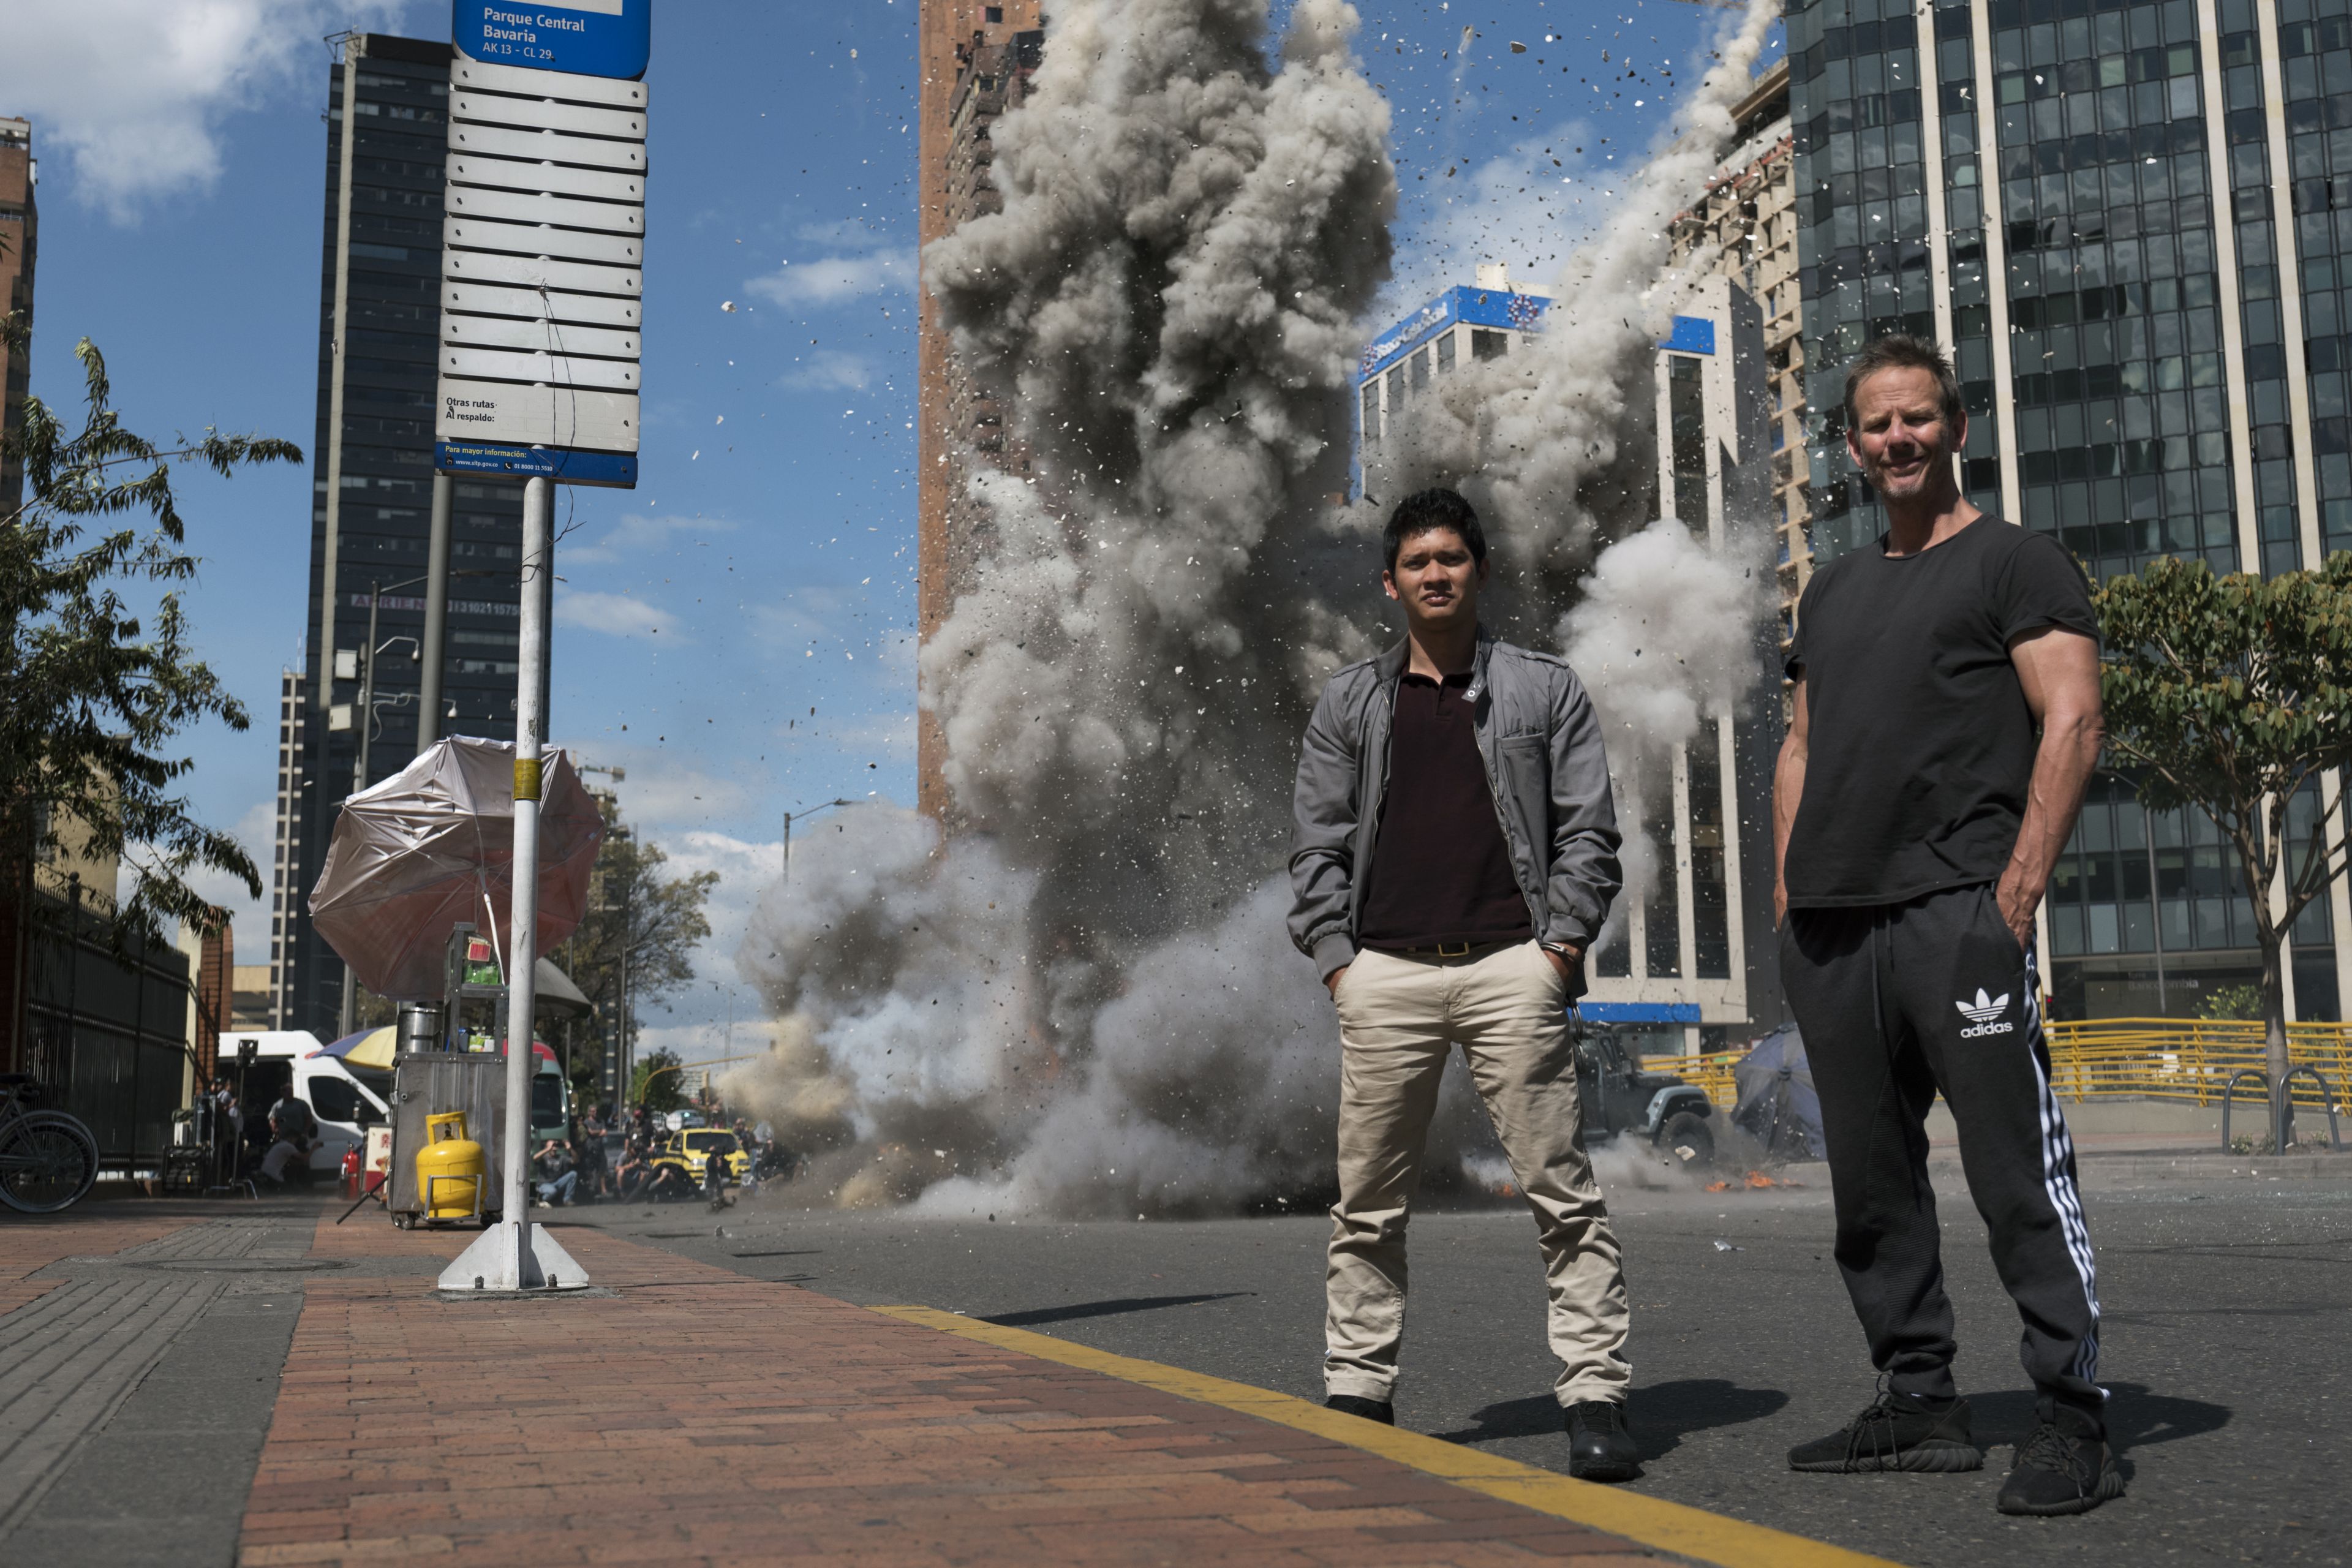 ART OF THE CUT with Melissa Lawson-Cheung and Colby Parker, Junior, ACE on editing "Mile 22" 2